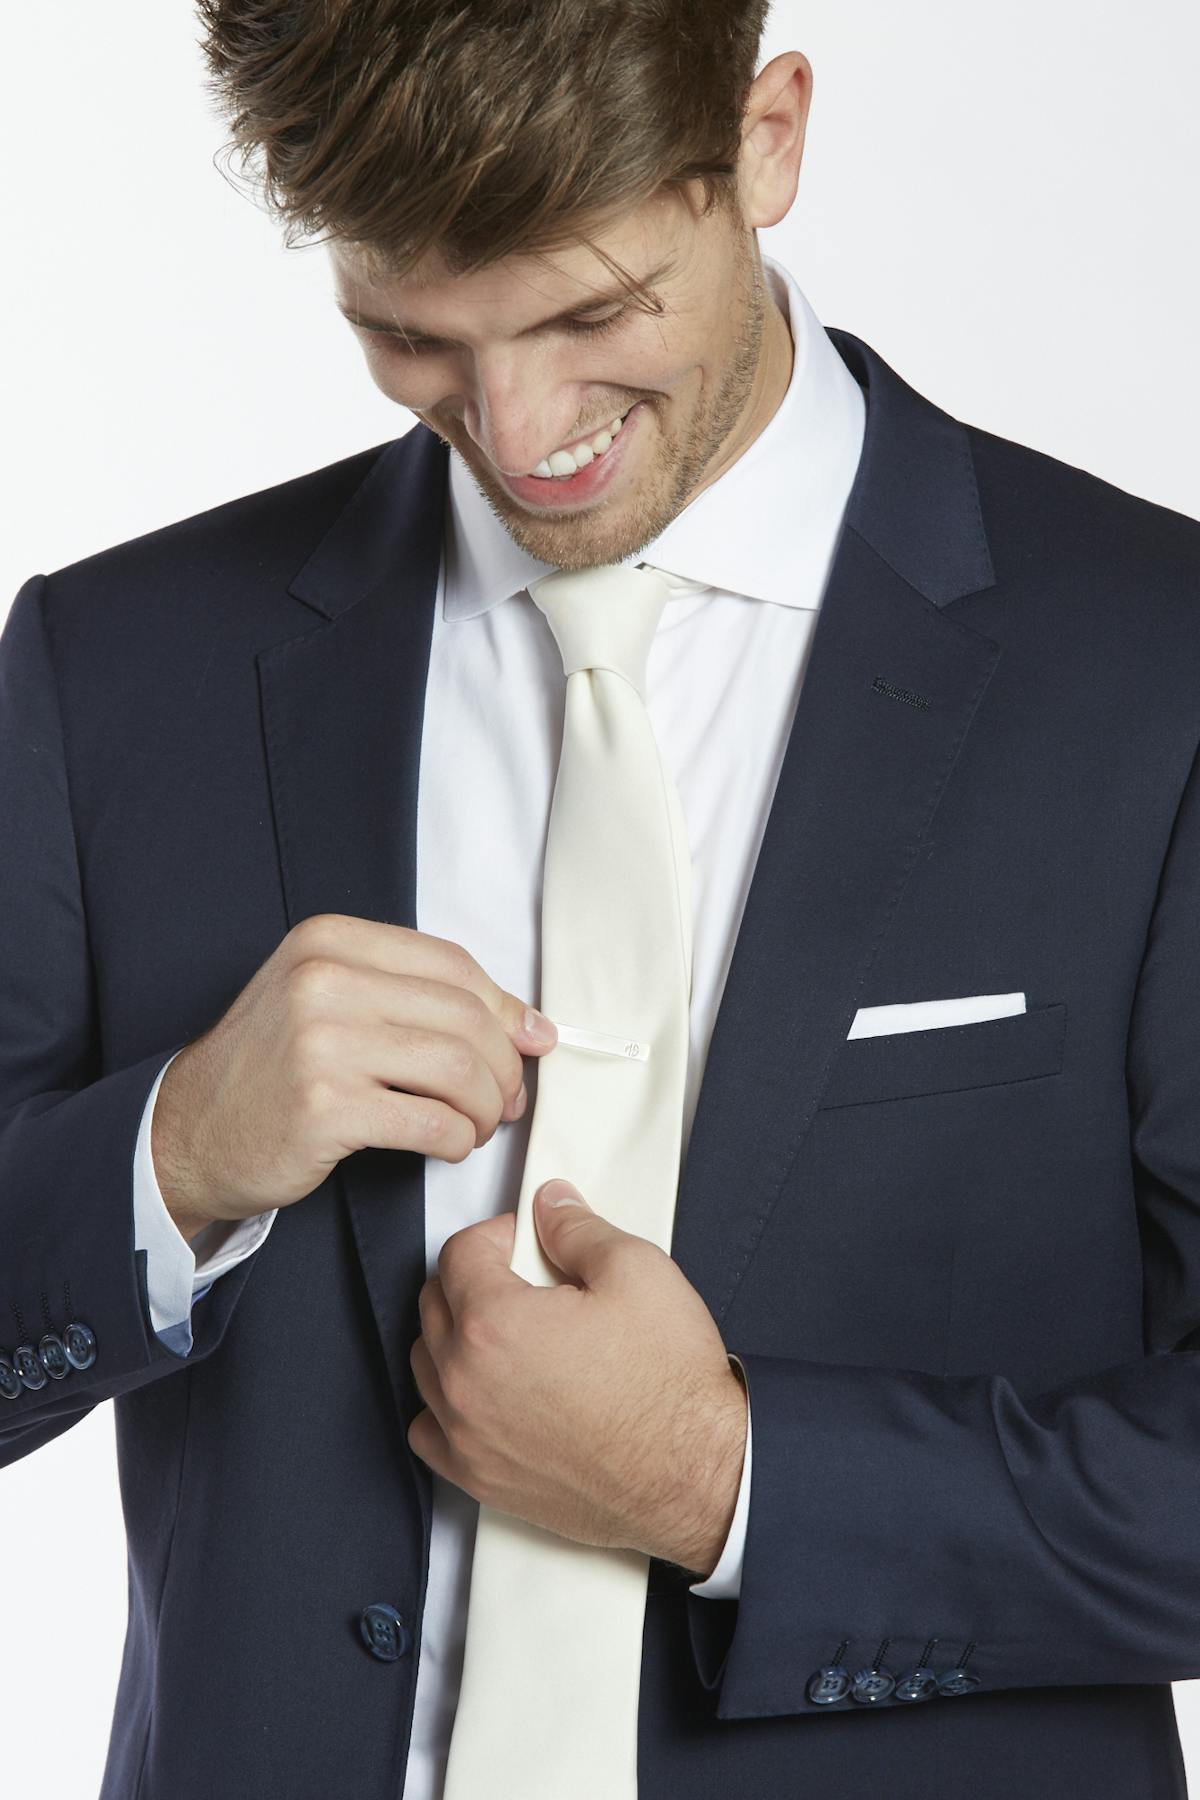 Mens wedding attire - everything looks better with a tie pin